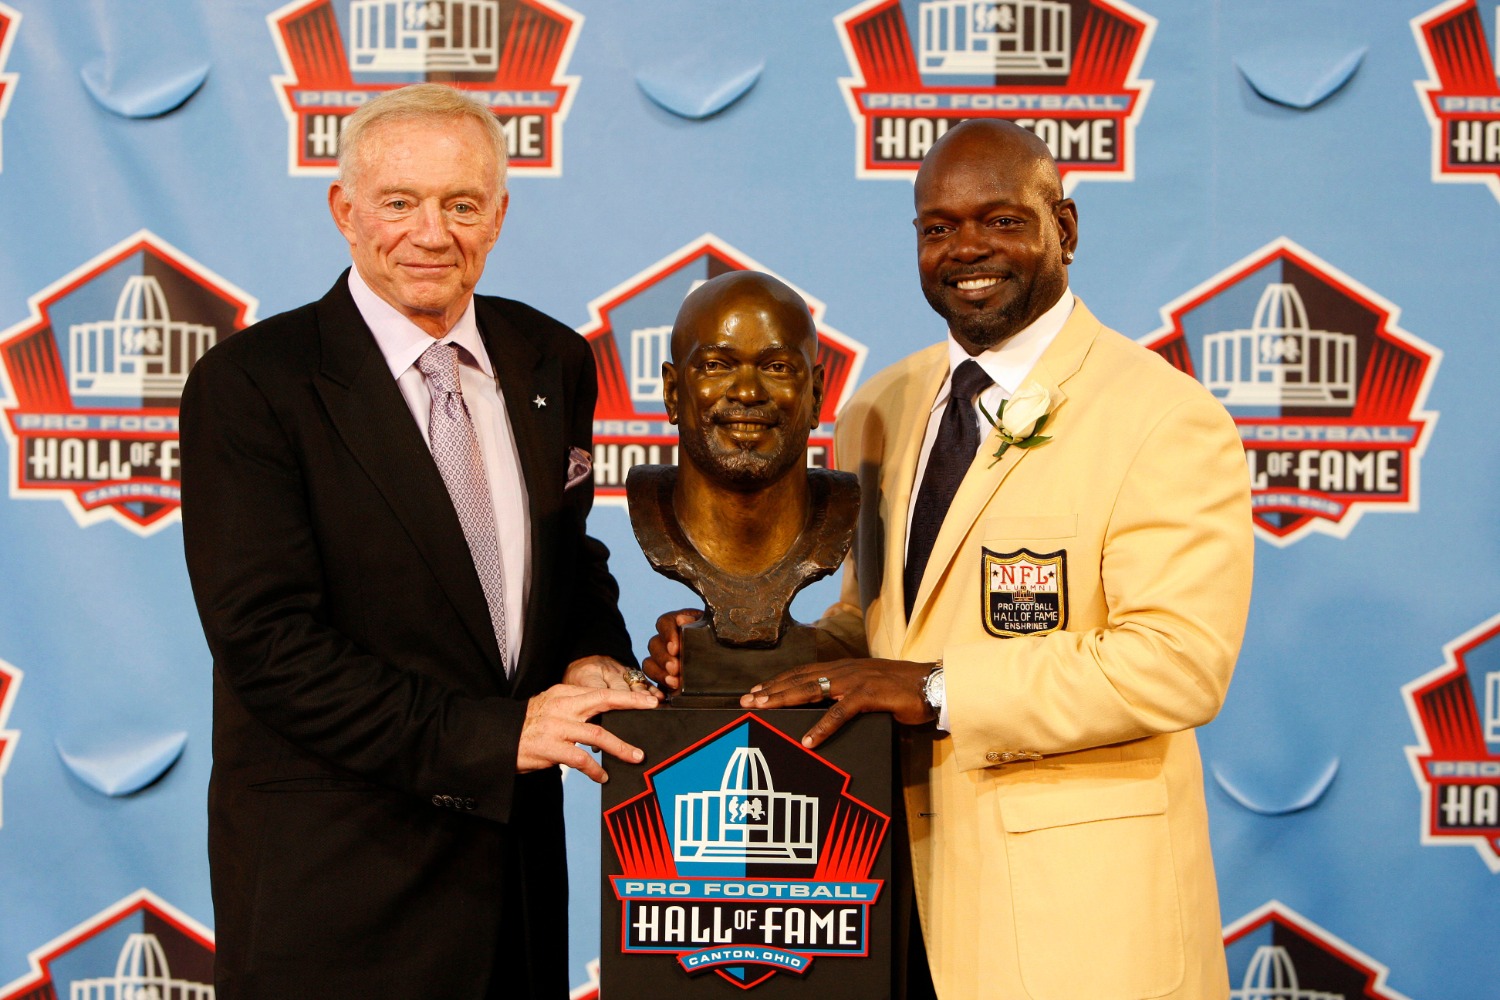 Jerry Jones Just Received a Stern Warning From Cowboys Legend Emmitt Smith